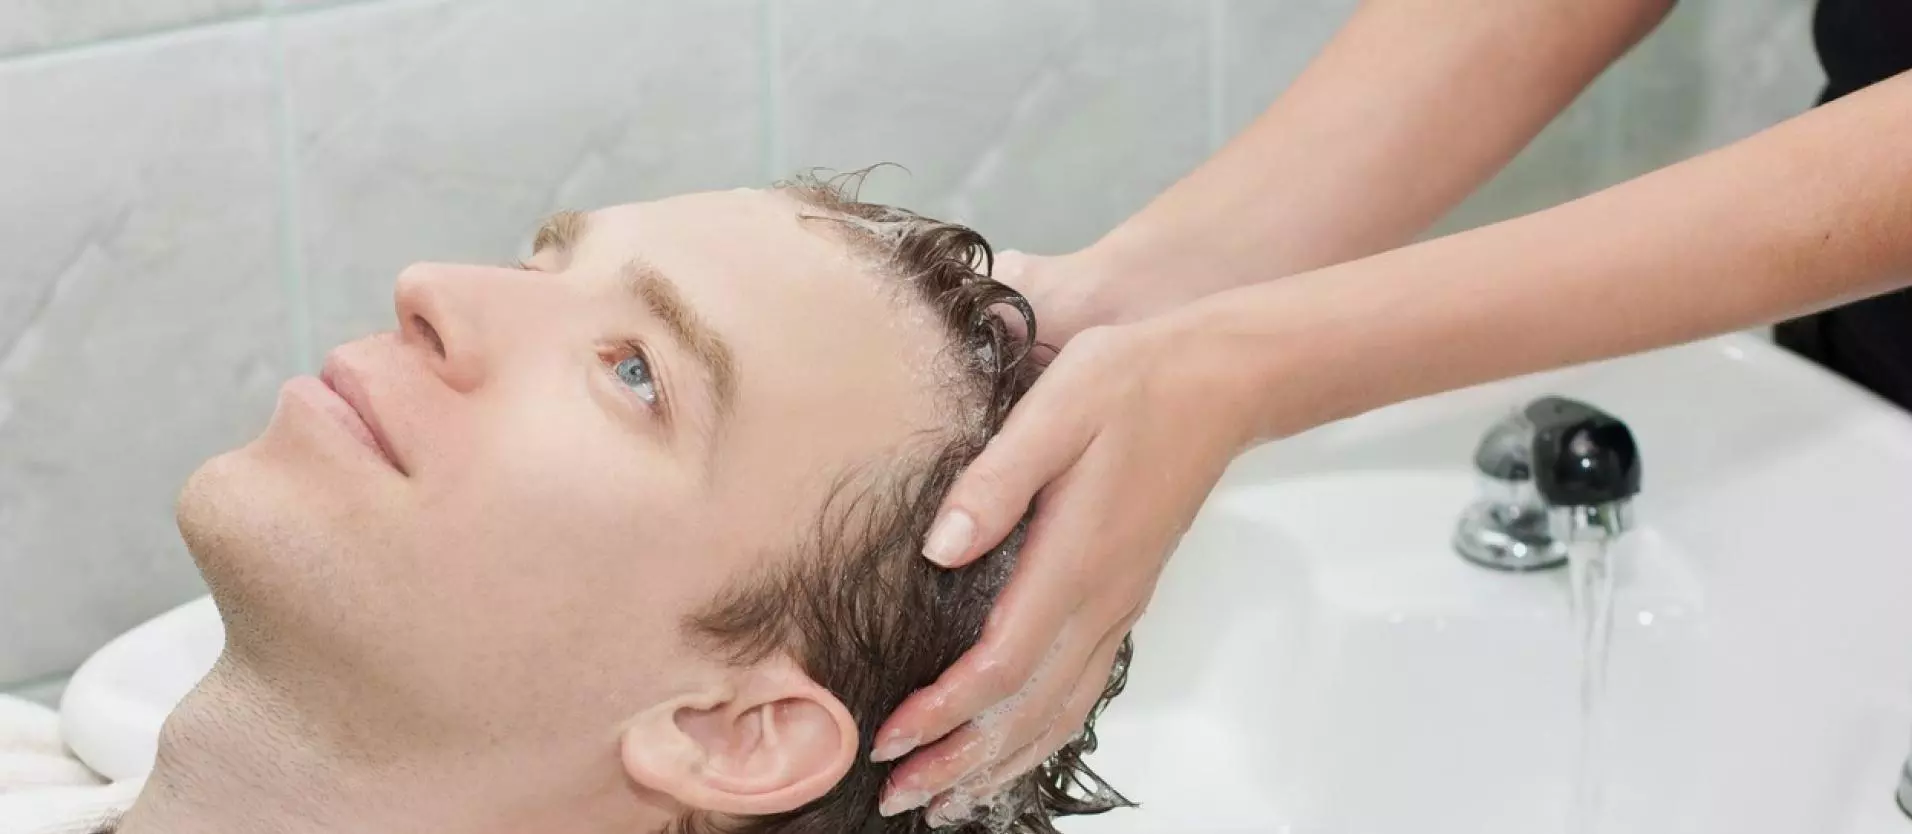 Does Washing Your Hair Often Cause Hair Loss? 